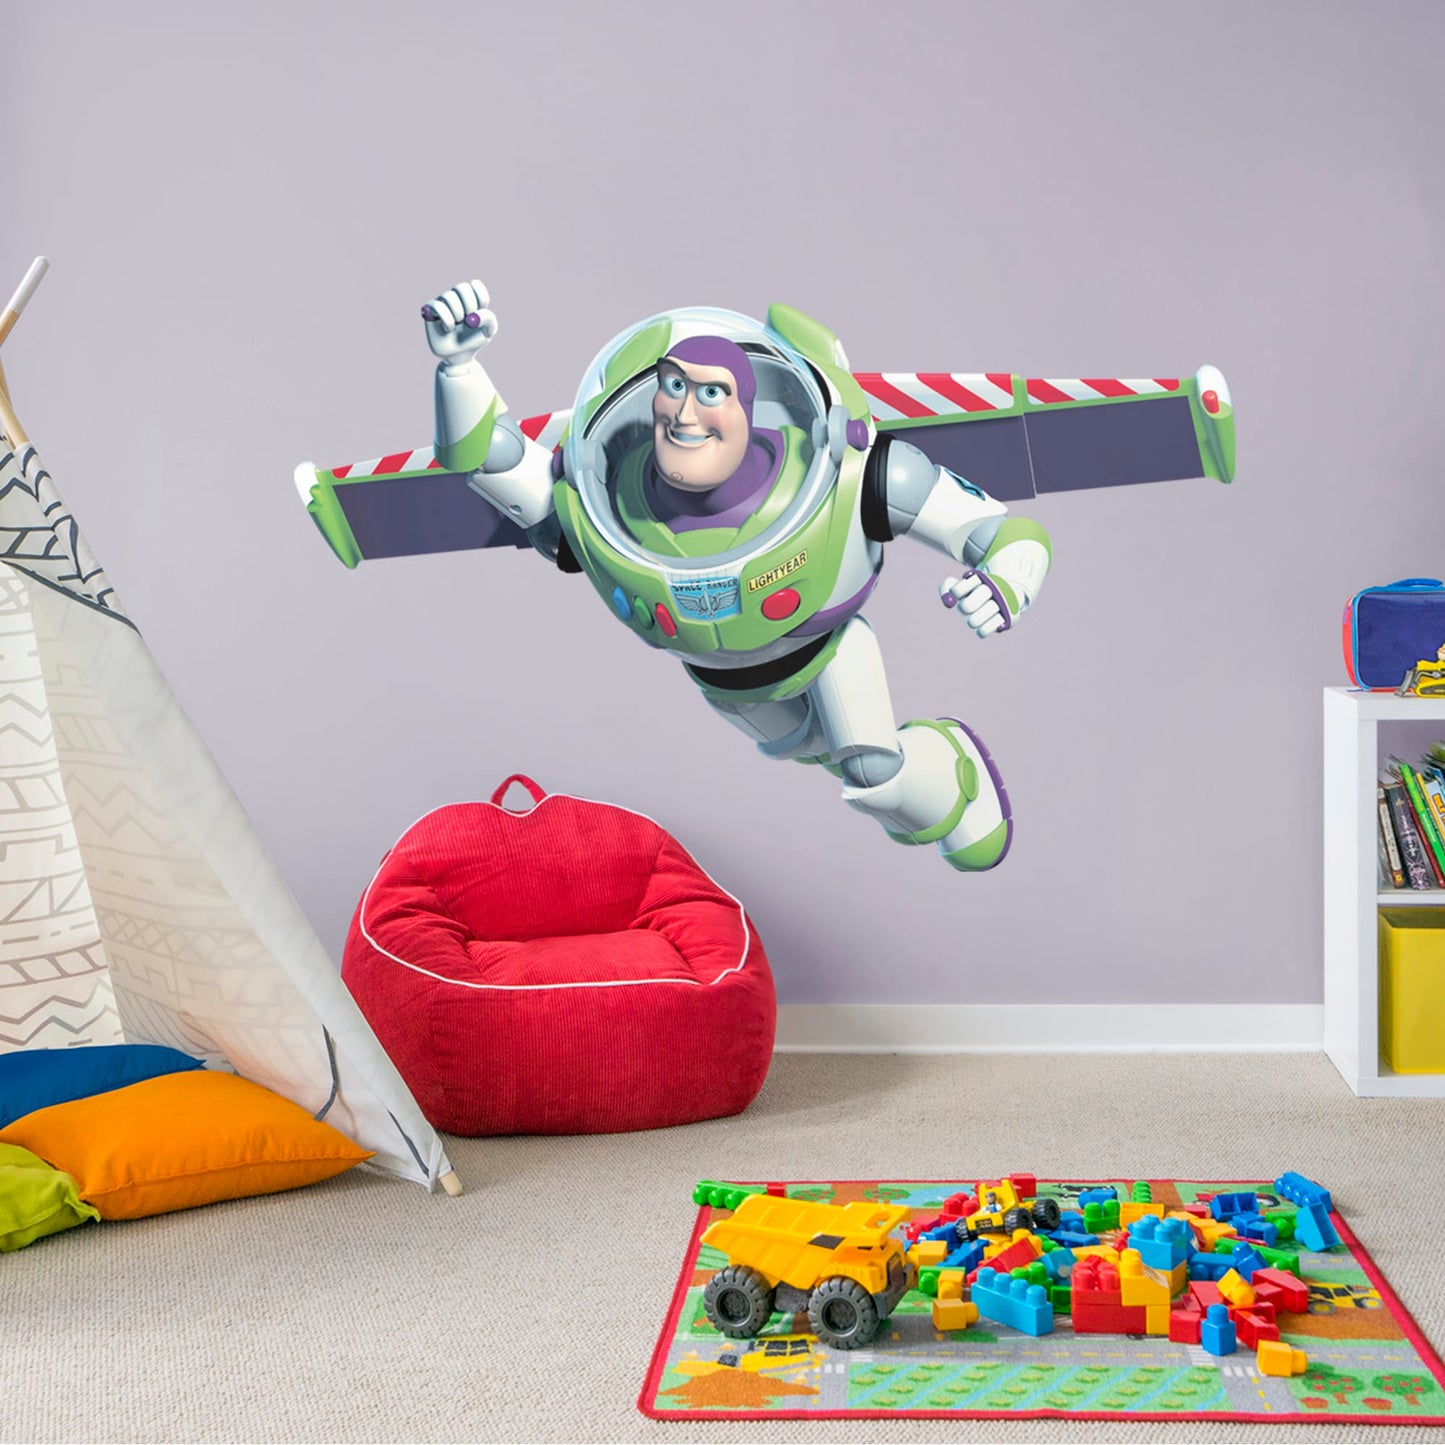 Buzz Lightyear - Officially Licensed Disney/PIXAR Removable Wall Decal